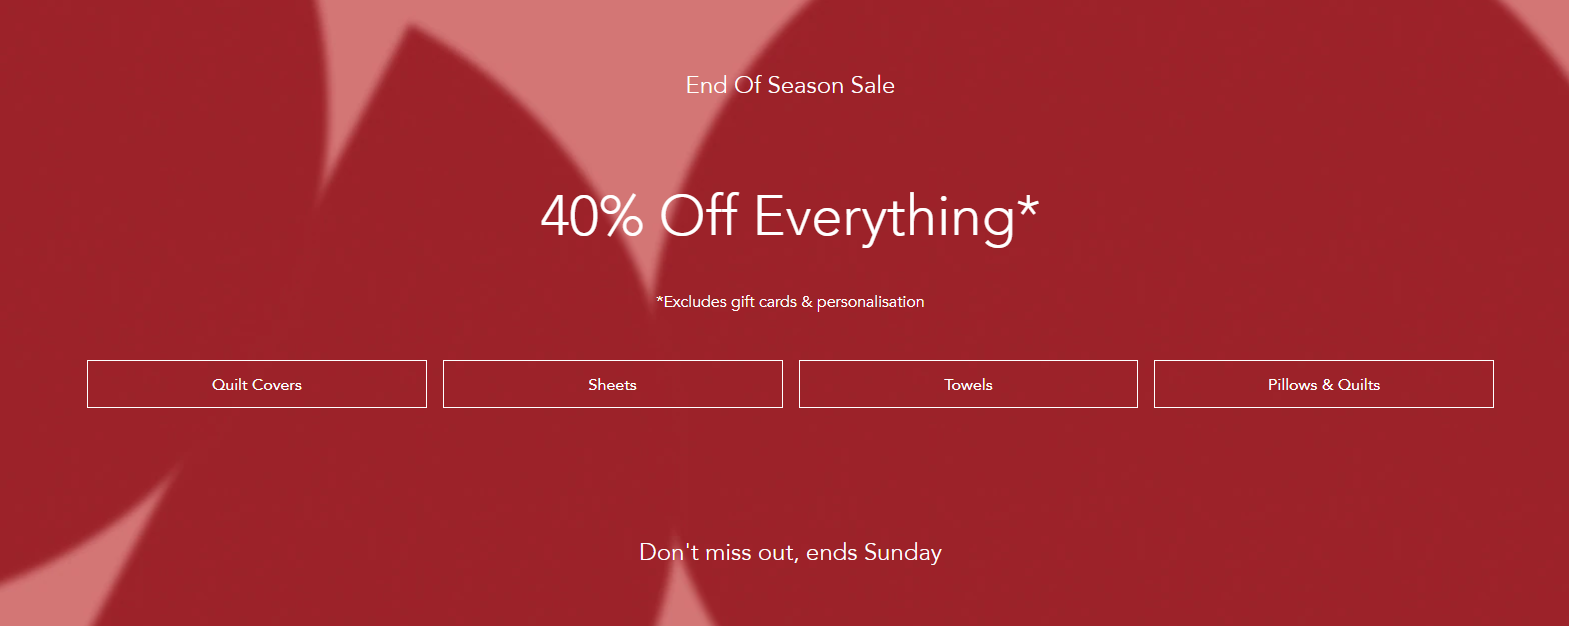 Sheridan End of Season sale - 40% OFF everything, Free shipping for members